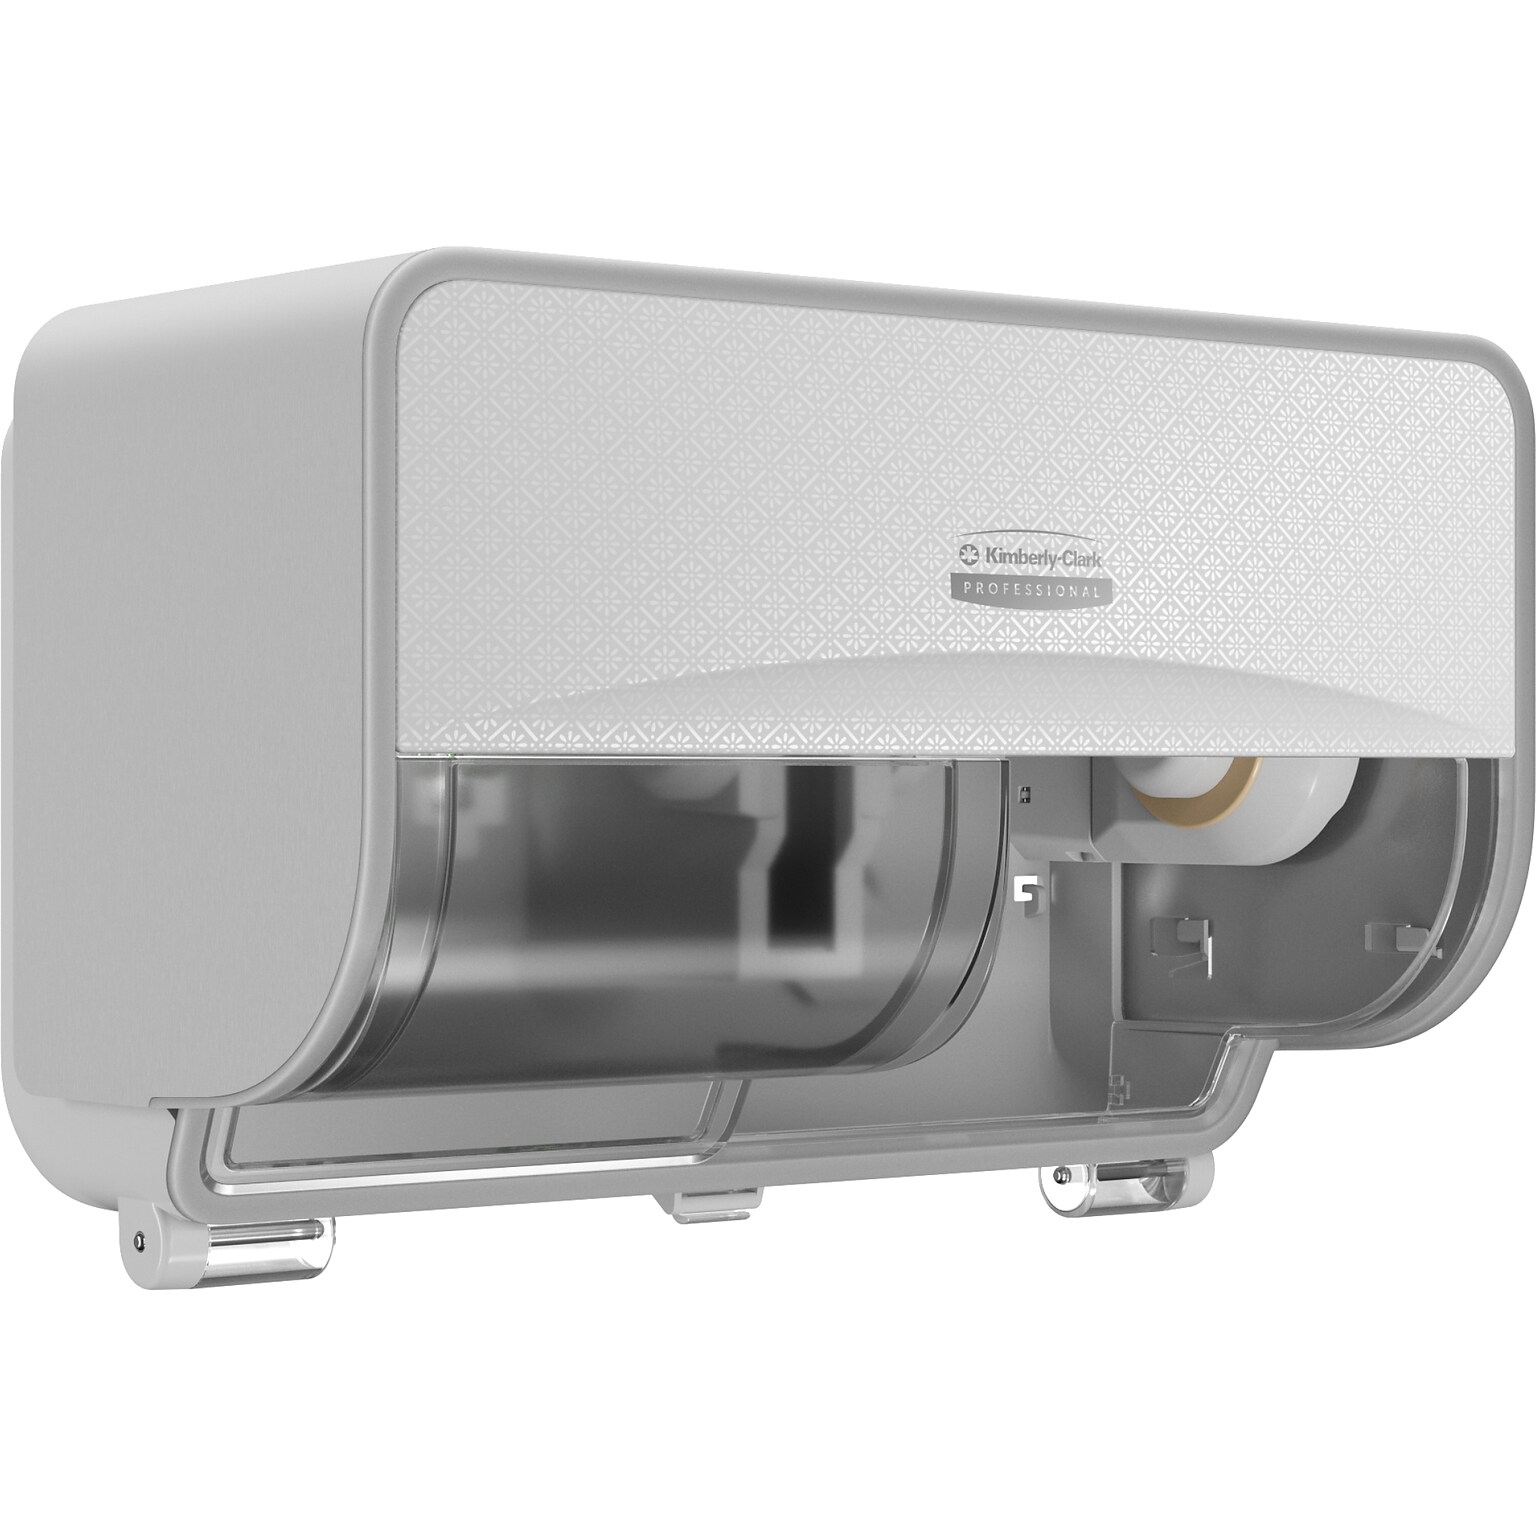 Kimberly-Clark Professional ICON Coreless 2-Roll Horizontal Toilet Paper Dispenser with Faceplate, White Mosaic (58712)